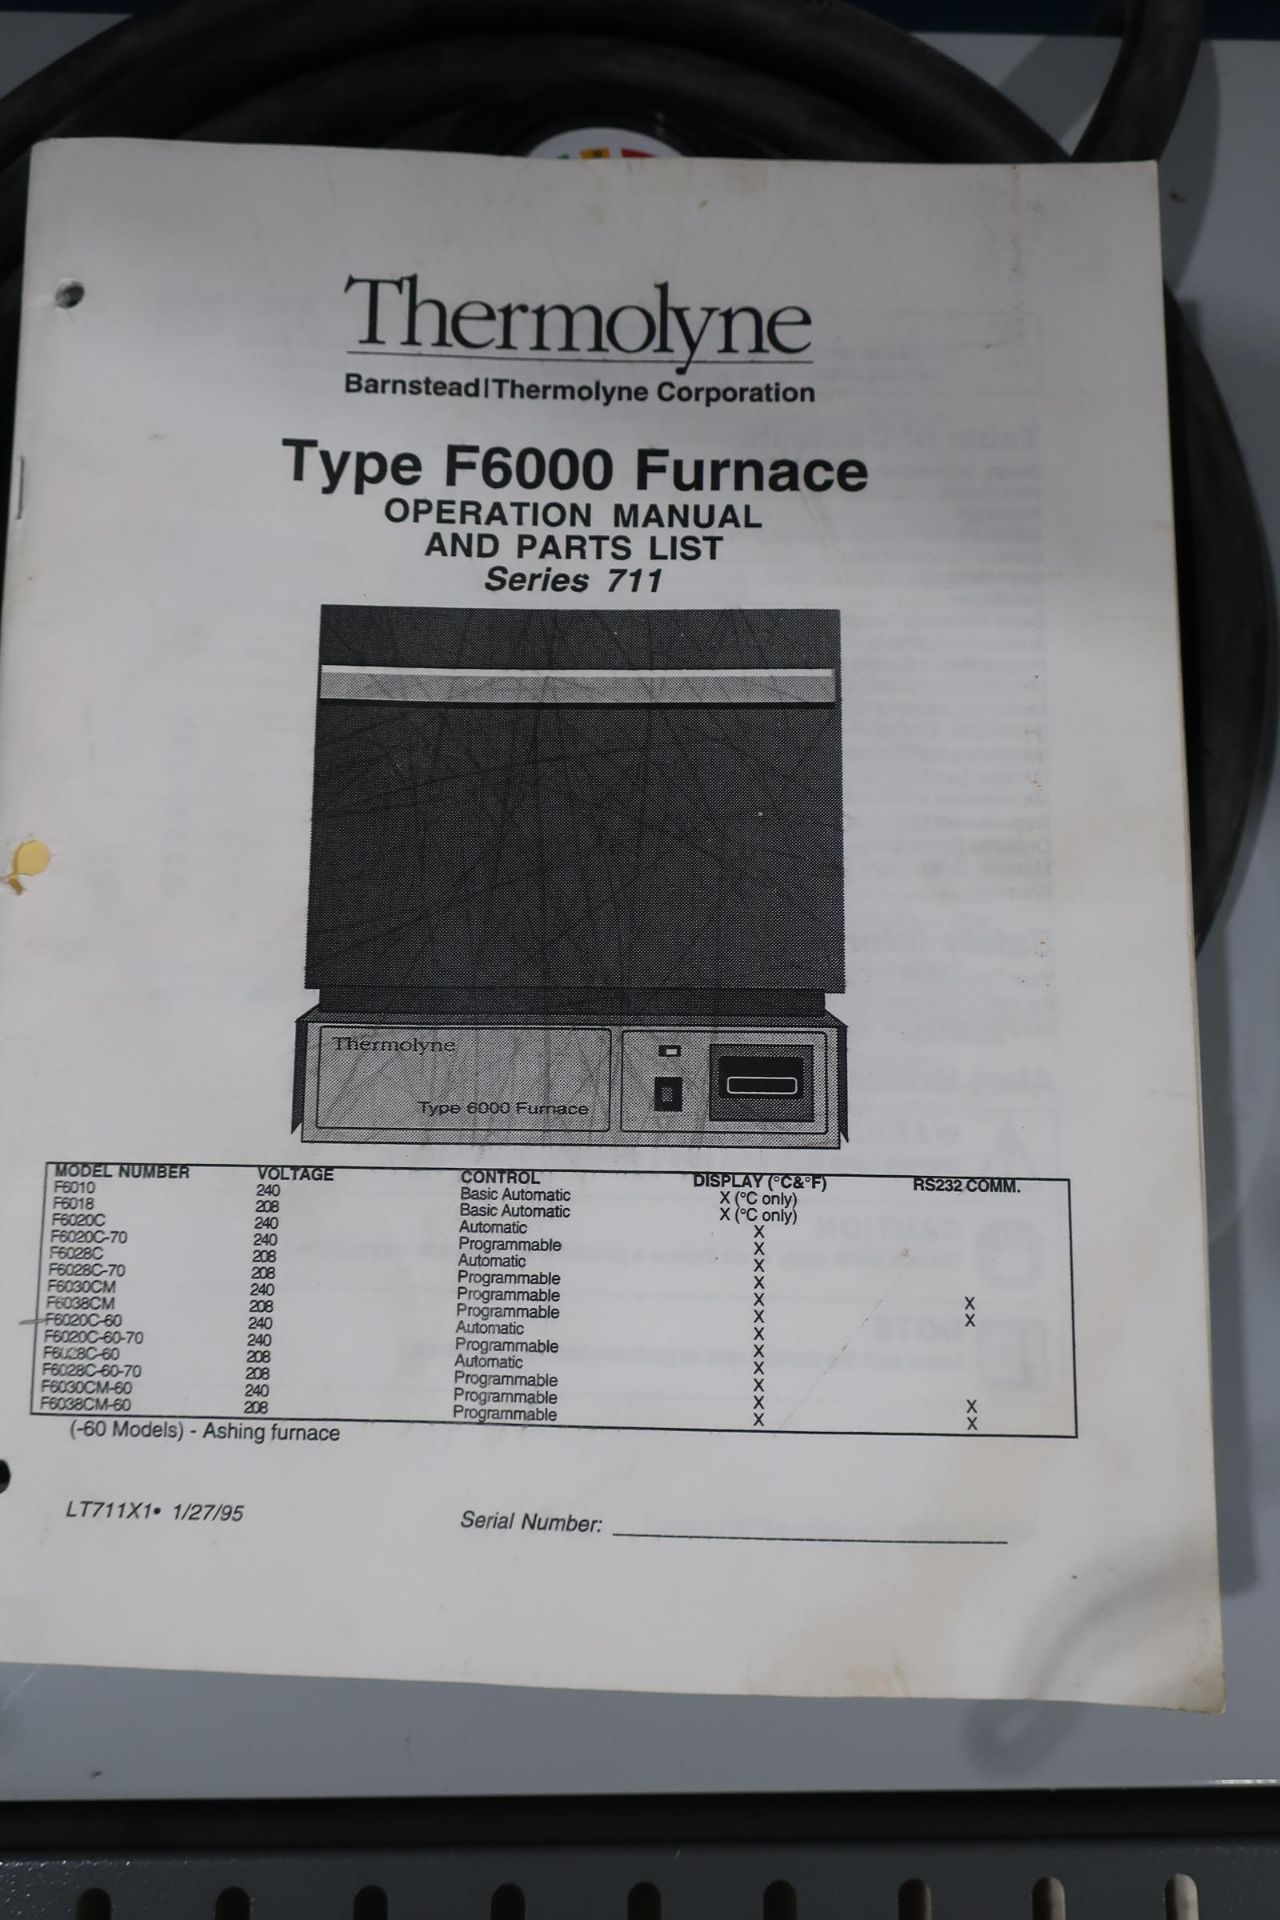 Thermolyne 6000 Furnace Model F6020C-60, SN 711950803359 - Image 5 of 5